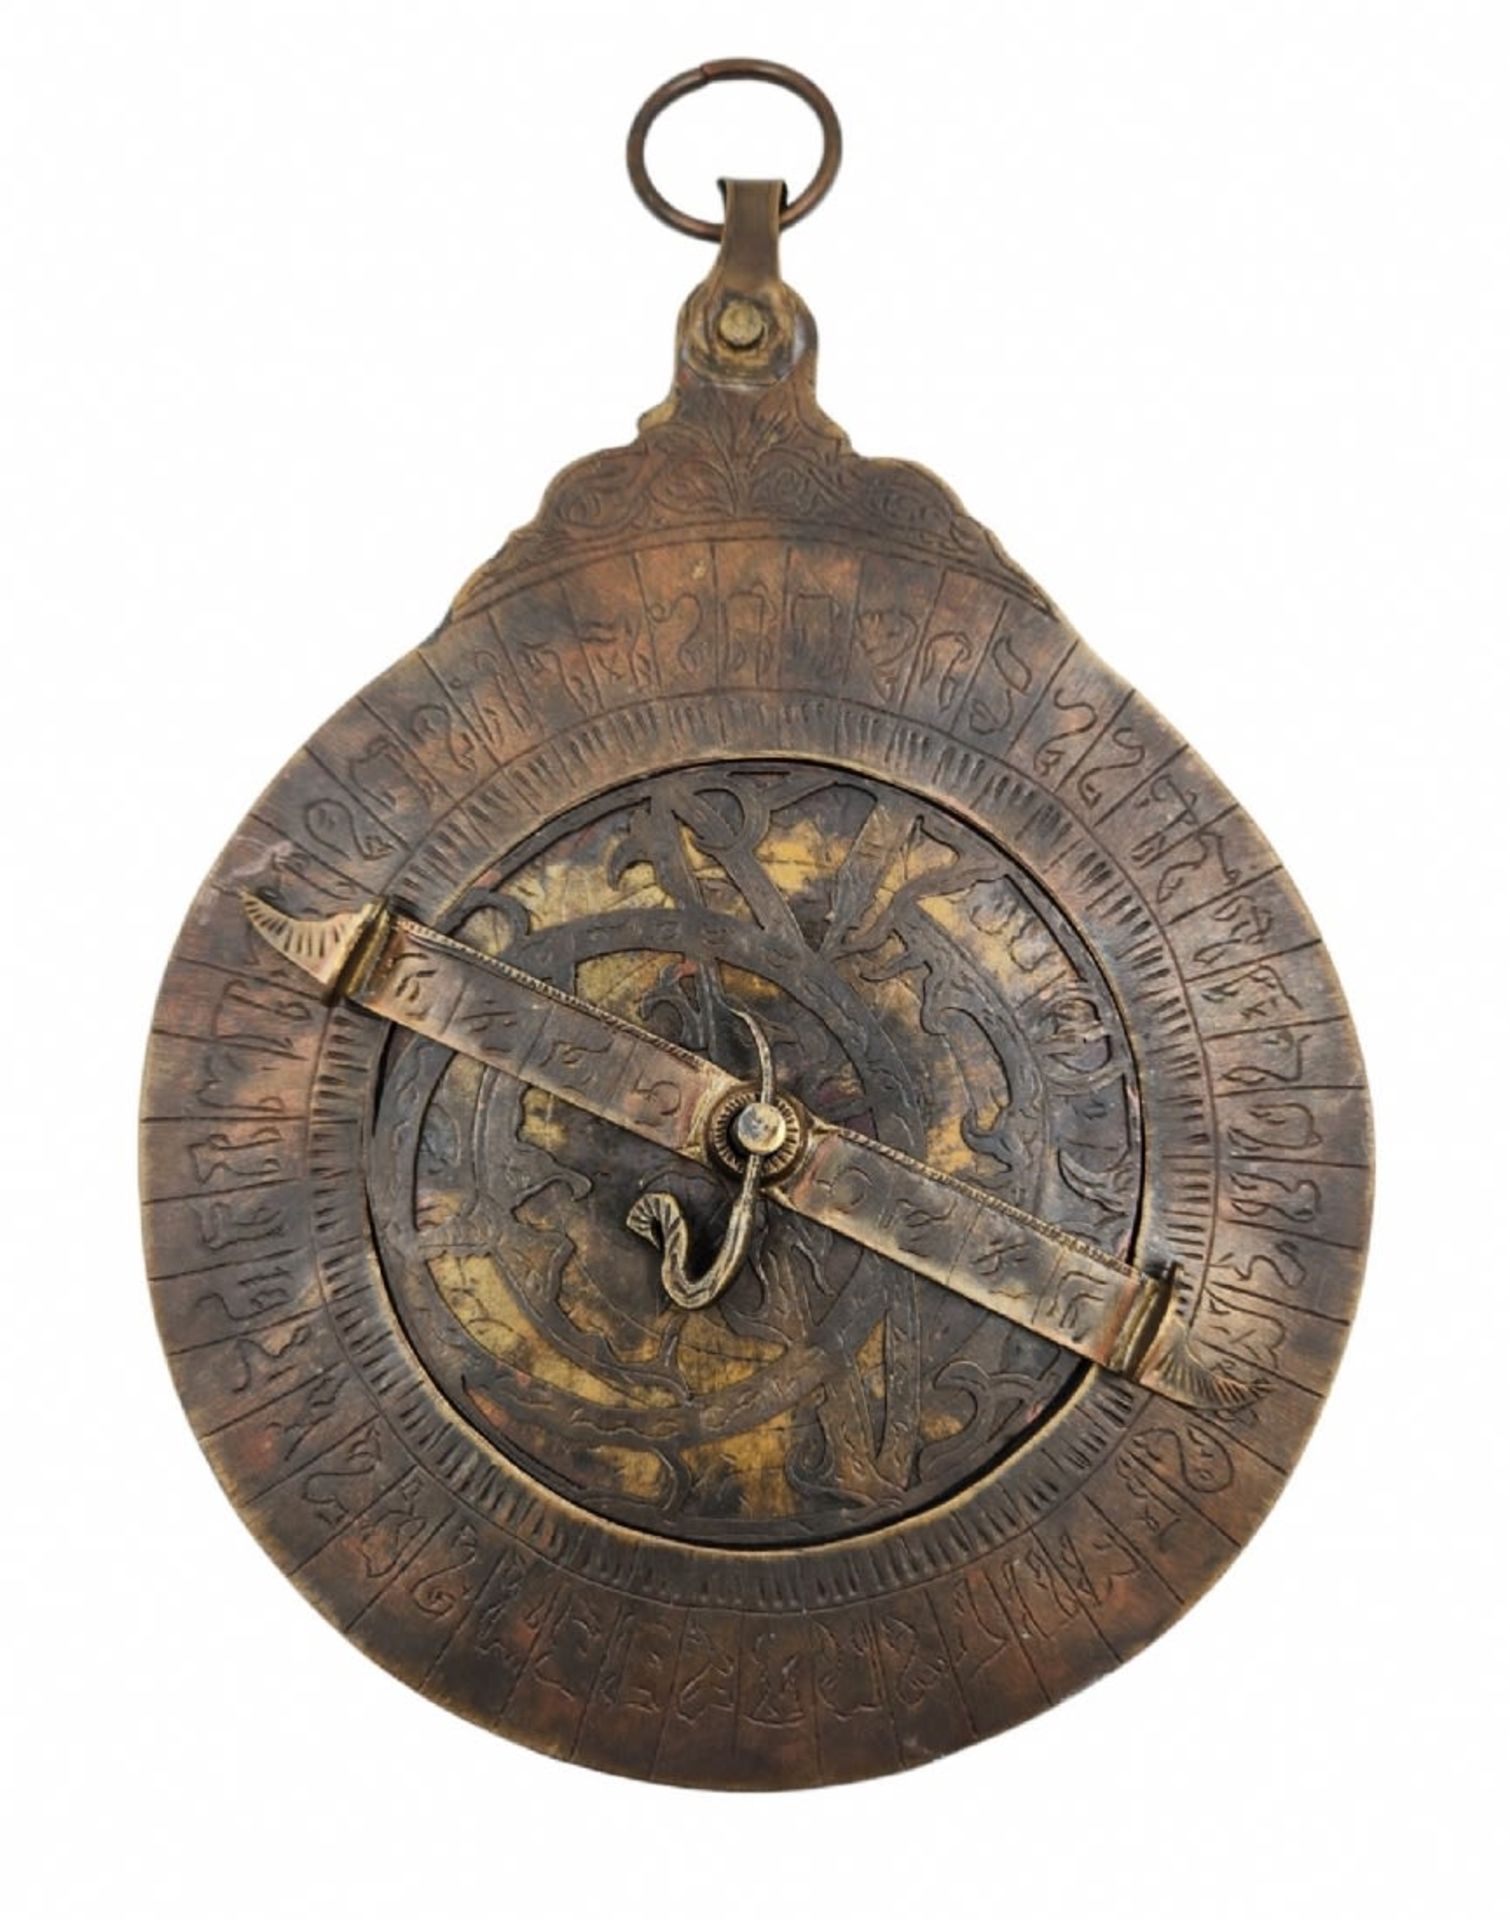 Astrolabe - Islamic Persian, made of brass, decorated with calligraphic engravings, end of the